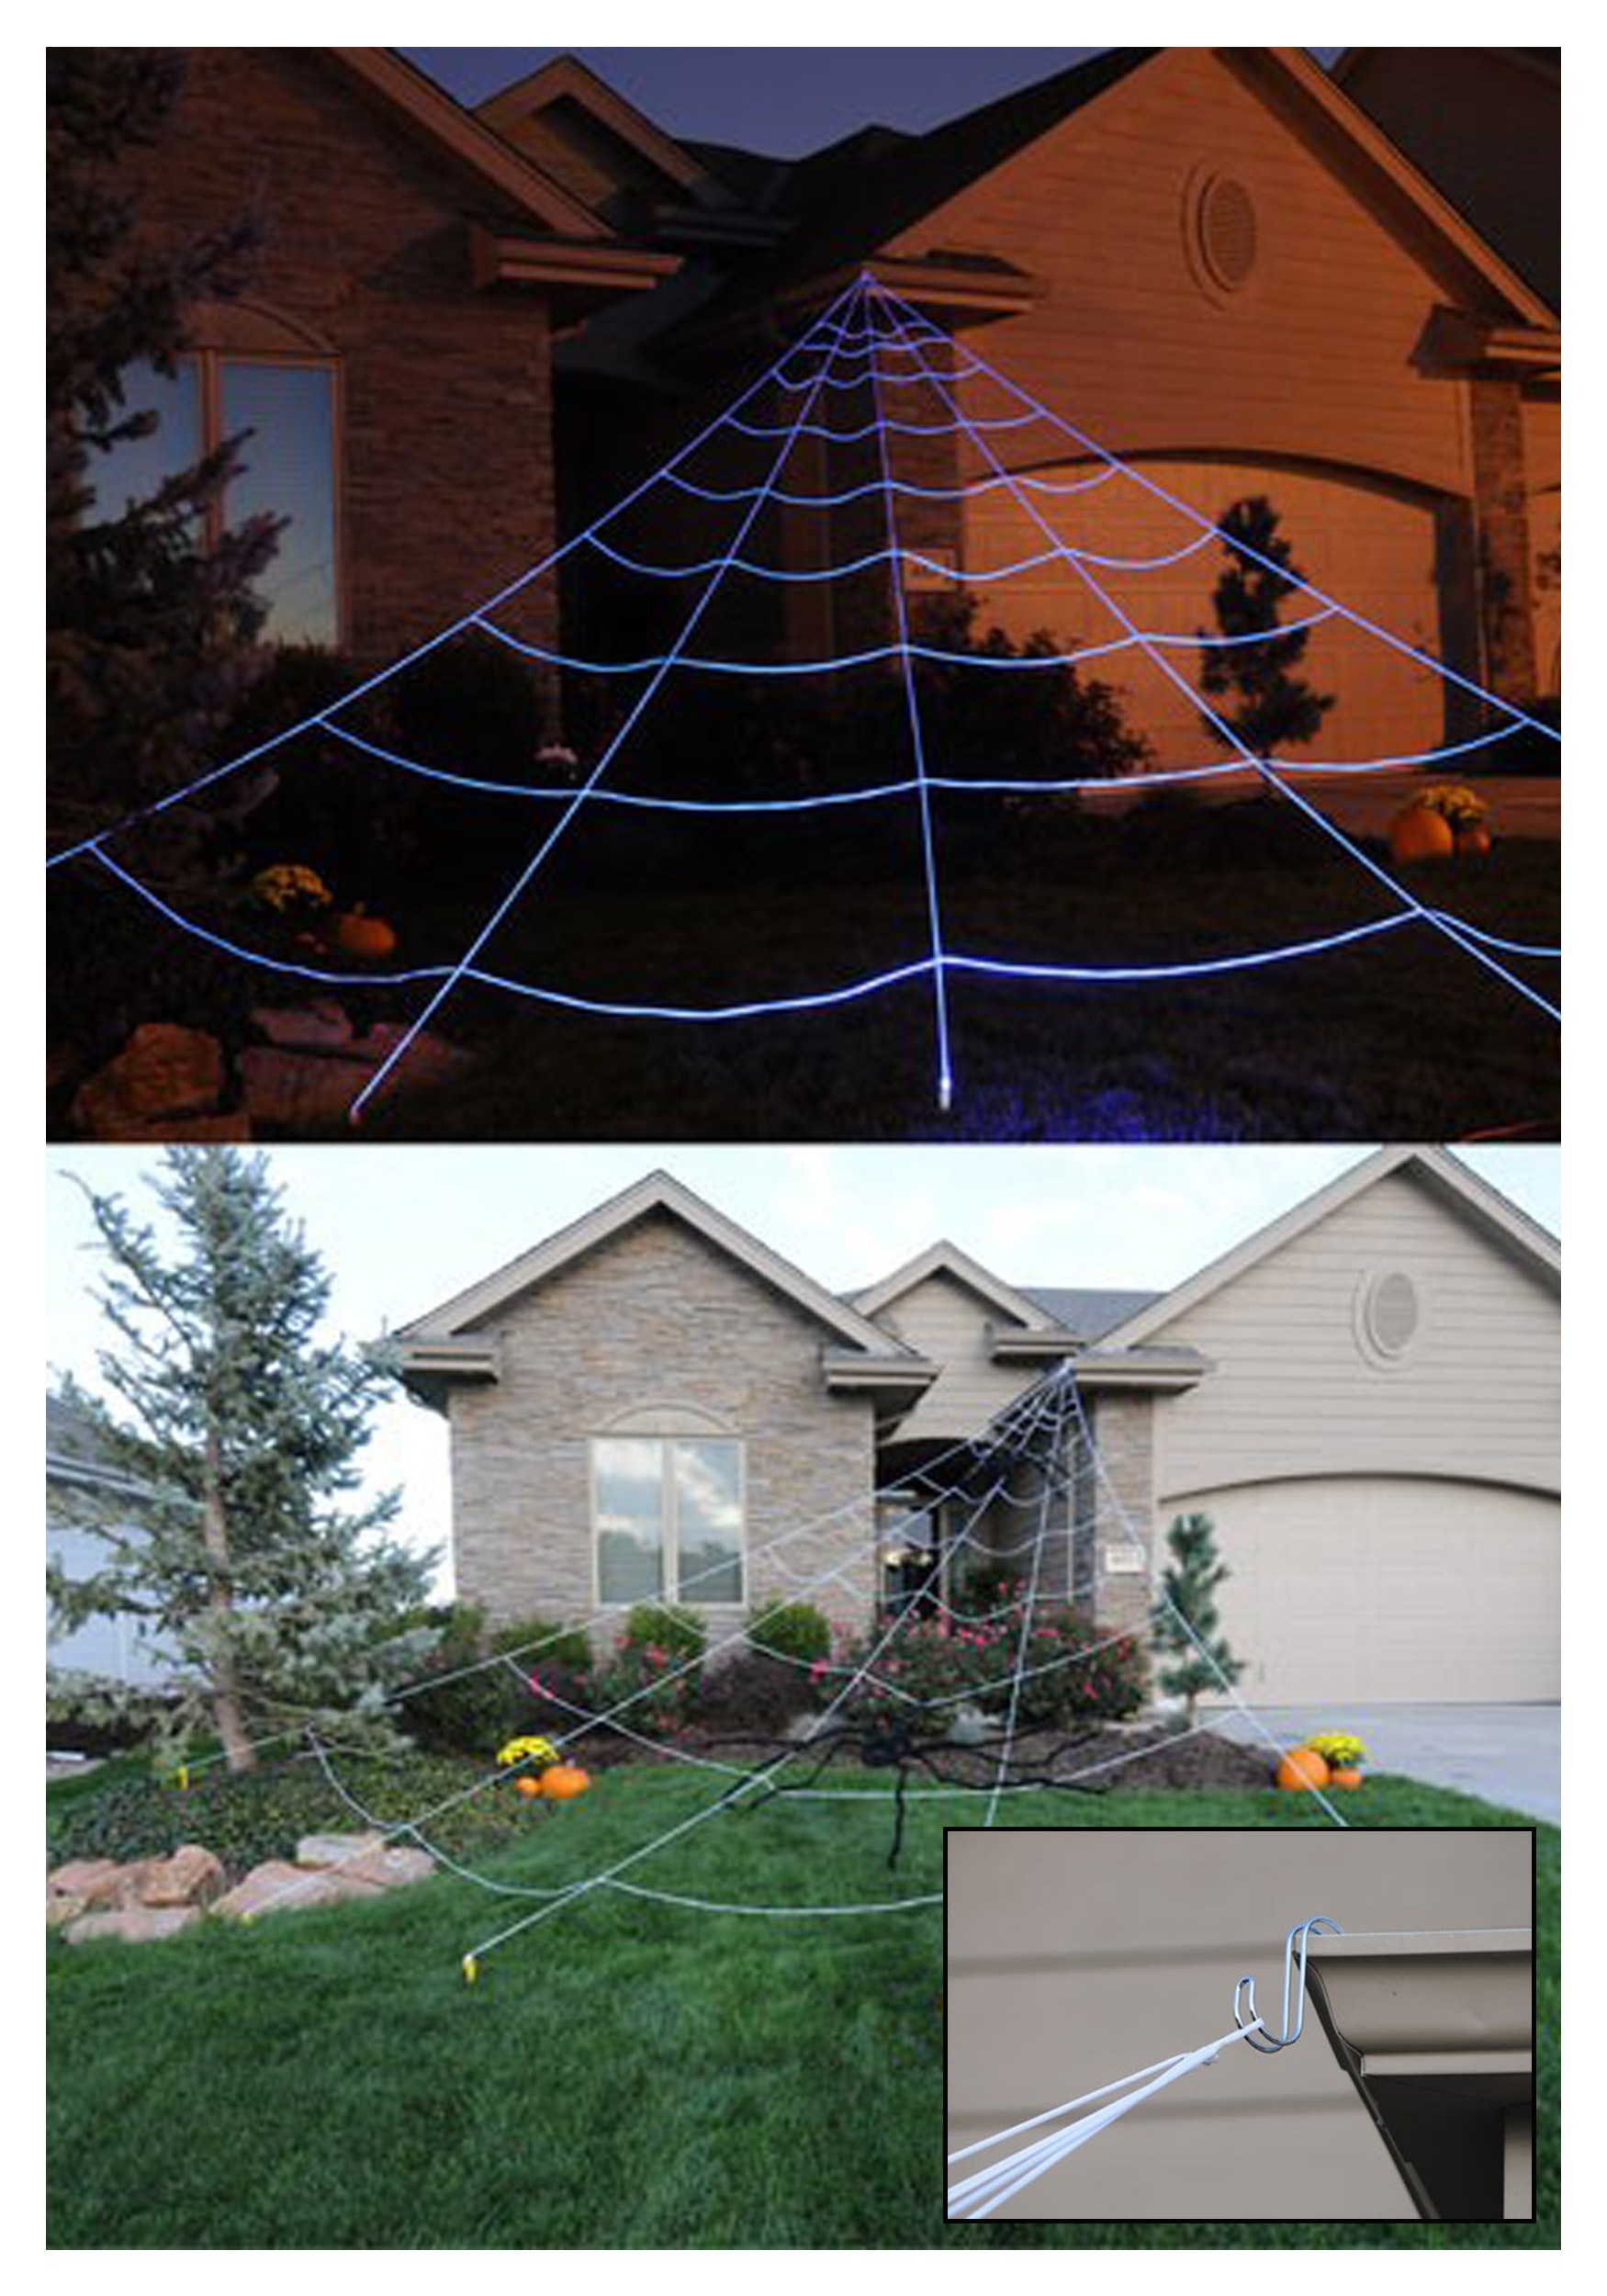 Halloween Decorations 200'' Triangular Spider Web+47'' Giant Fake Spiders+100g Stretch Cobweb with 20 Small Spiders for Outdoor Halloween Decor Clearance Yard Home Costumes Party Haunted House